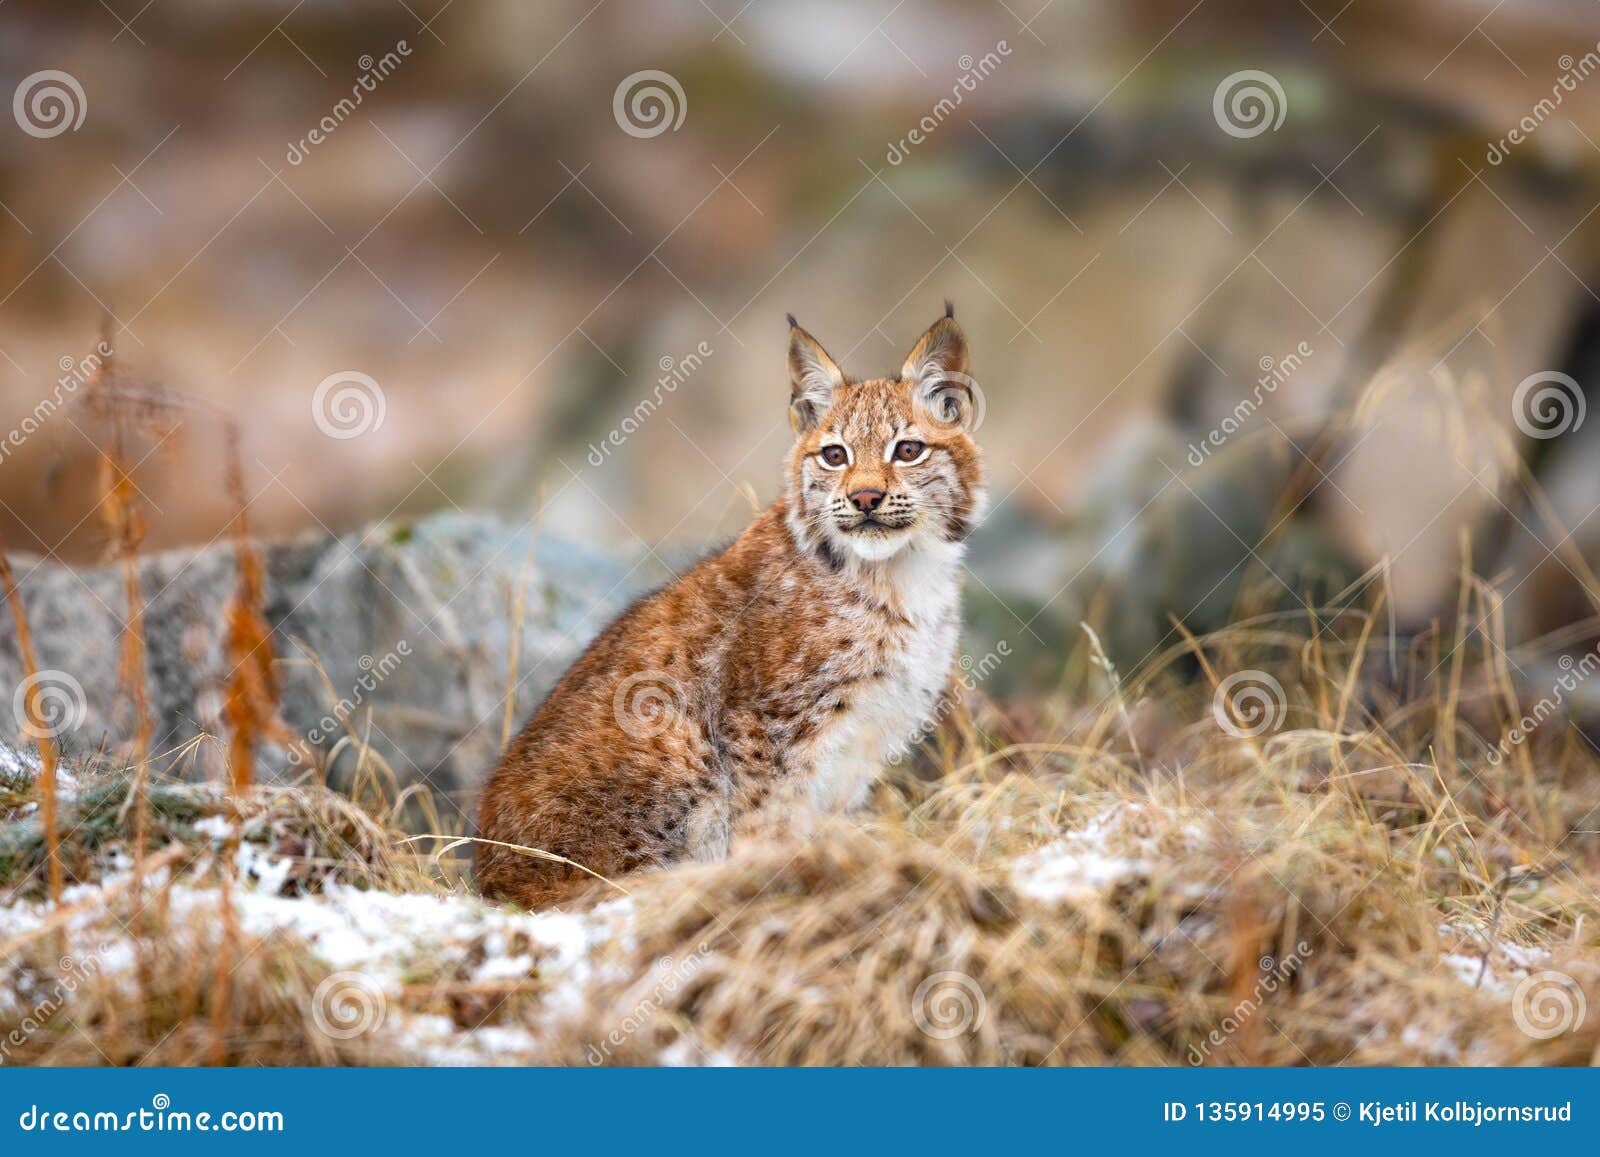 Eurasian Lynx Sitting in the Woods at Early Winter Stock Image - Image ...